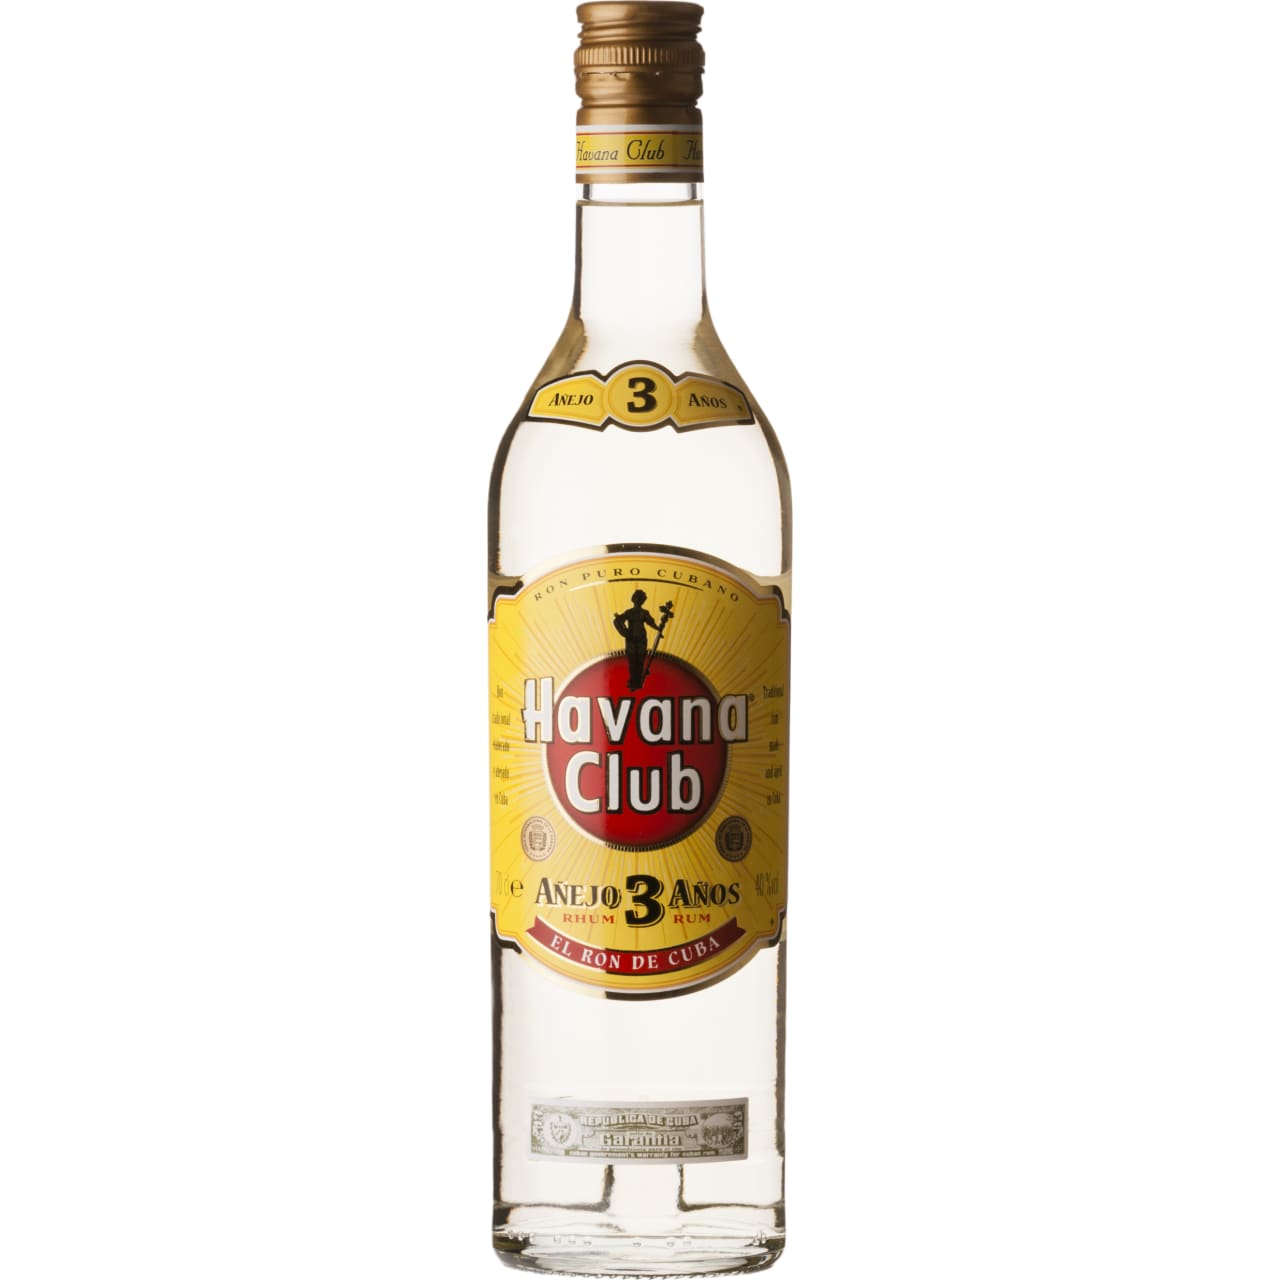 Freshness from the continuous distillation of sugarcane molasses and character from ageing: a winning combination. Havana Club 3 Años has a pale, golden straw colour that reveals its age: every single drop has aged for a minimum of three years.